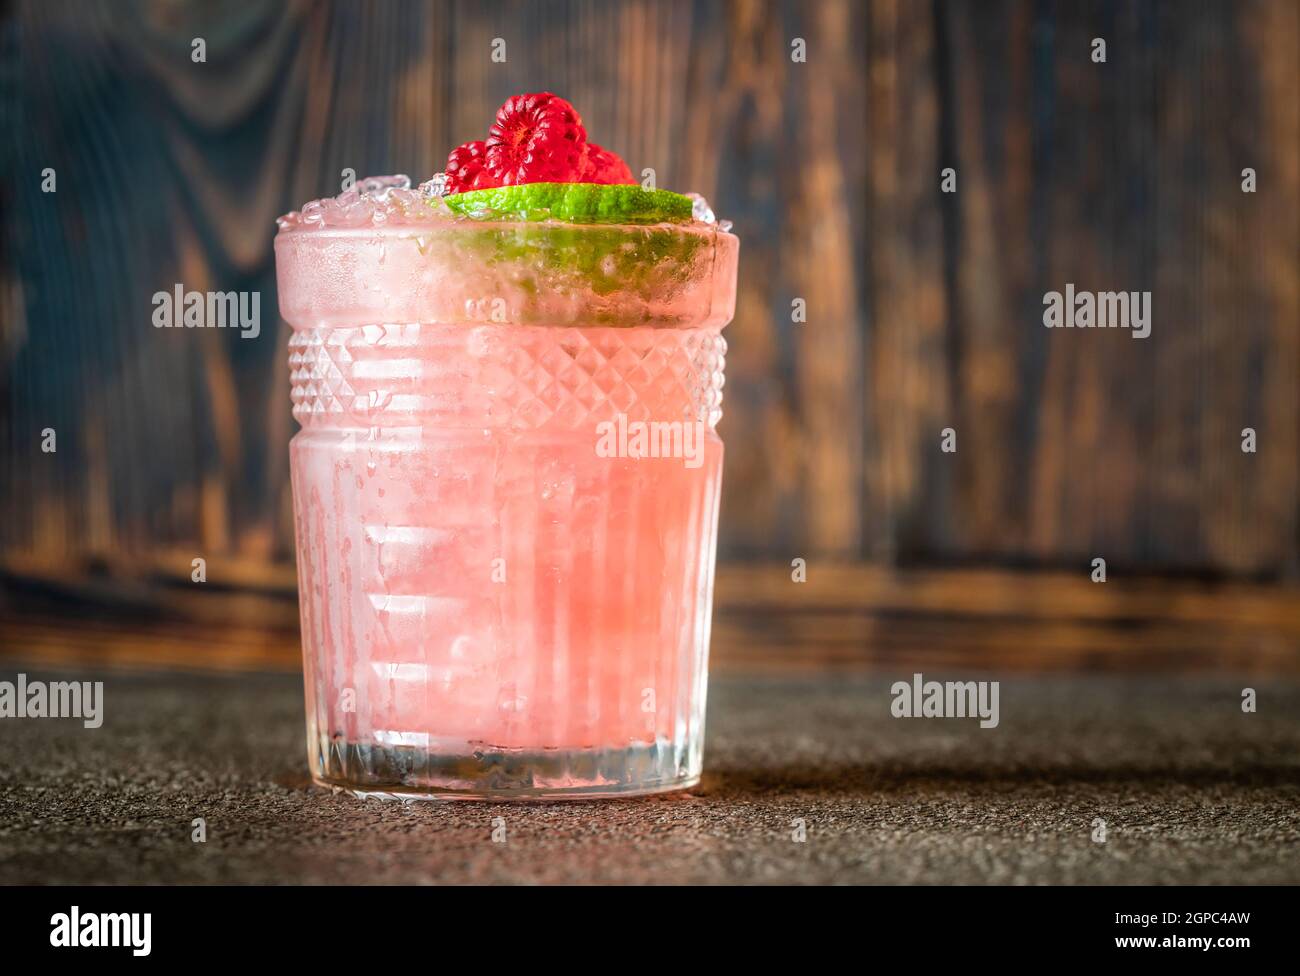 Glass of Knickerbocker cocktail made of rum, lime juice, orange curacao and raspberry syrup Stock Photo